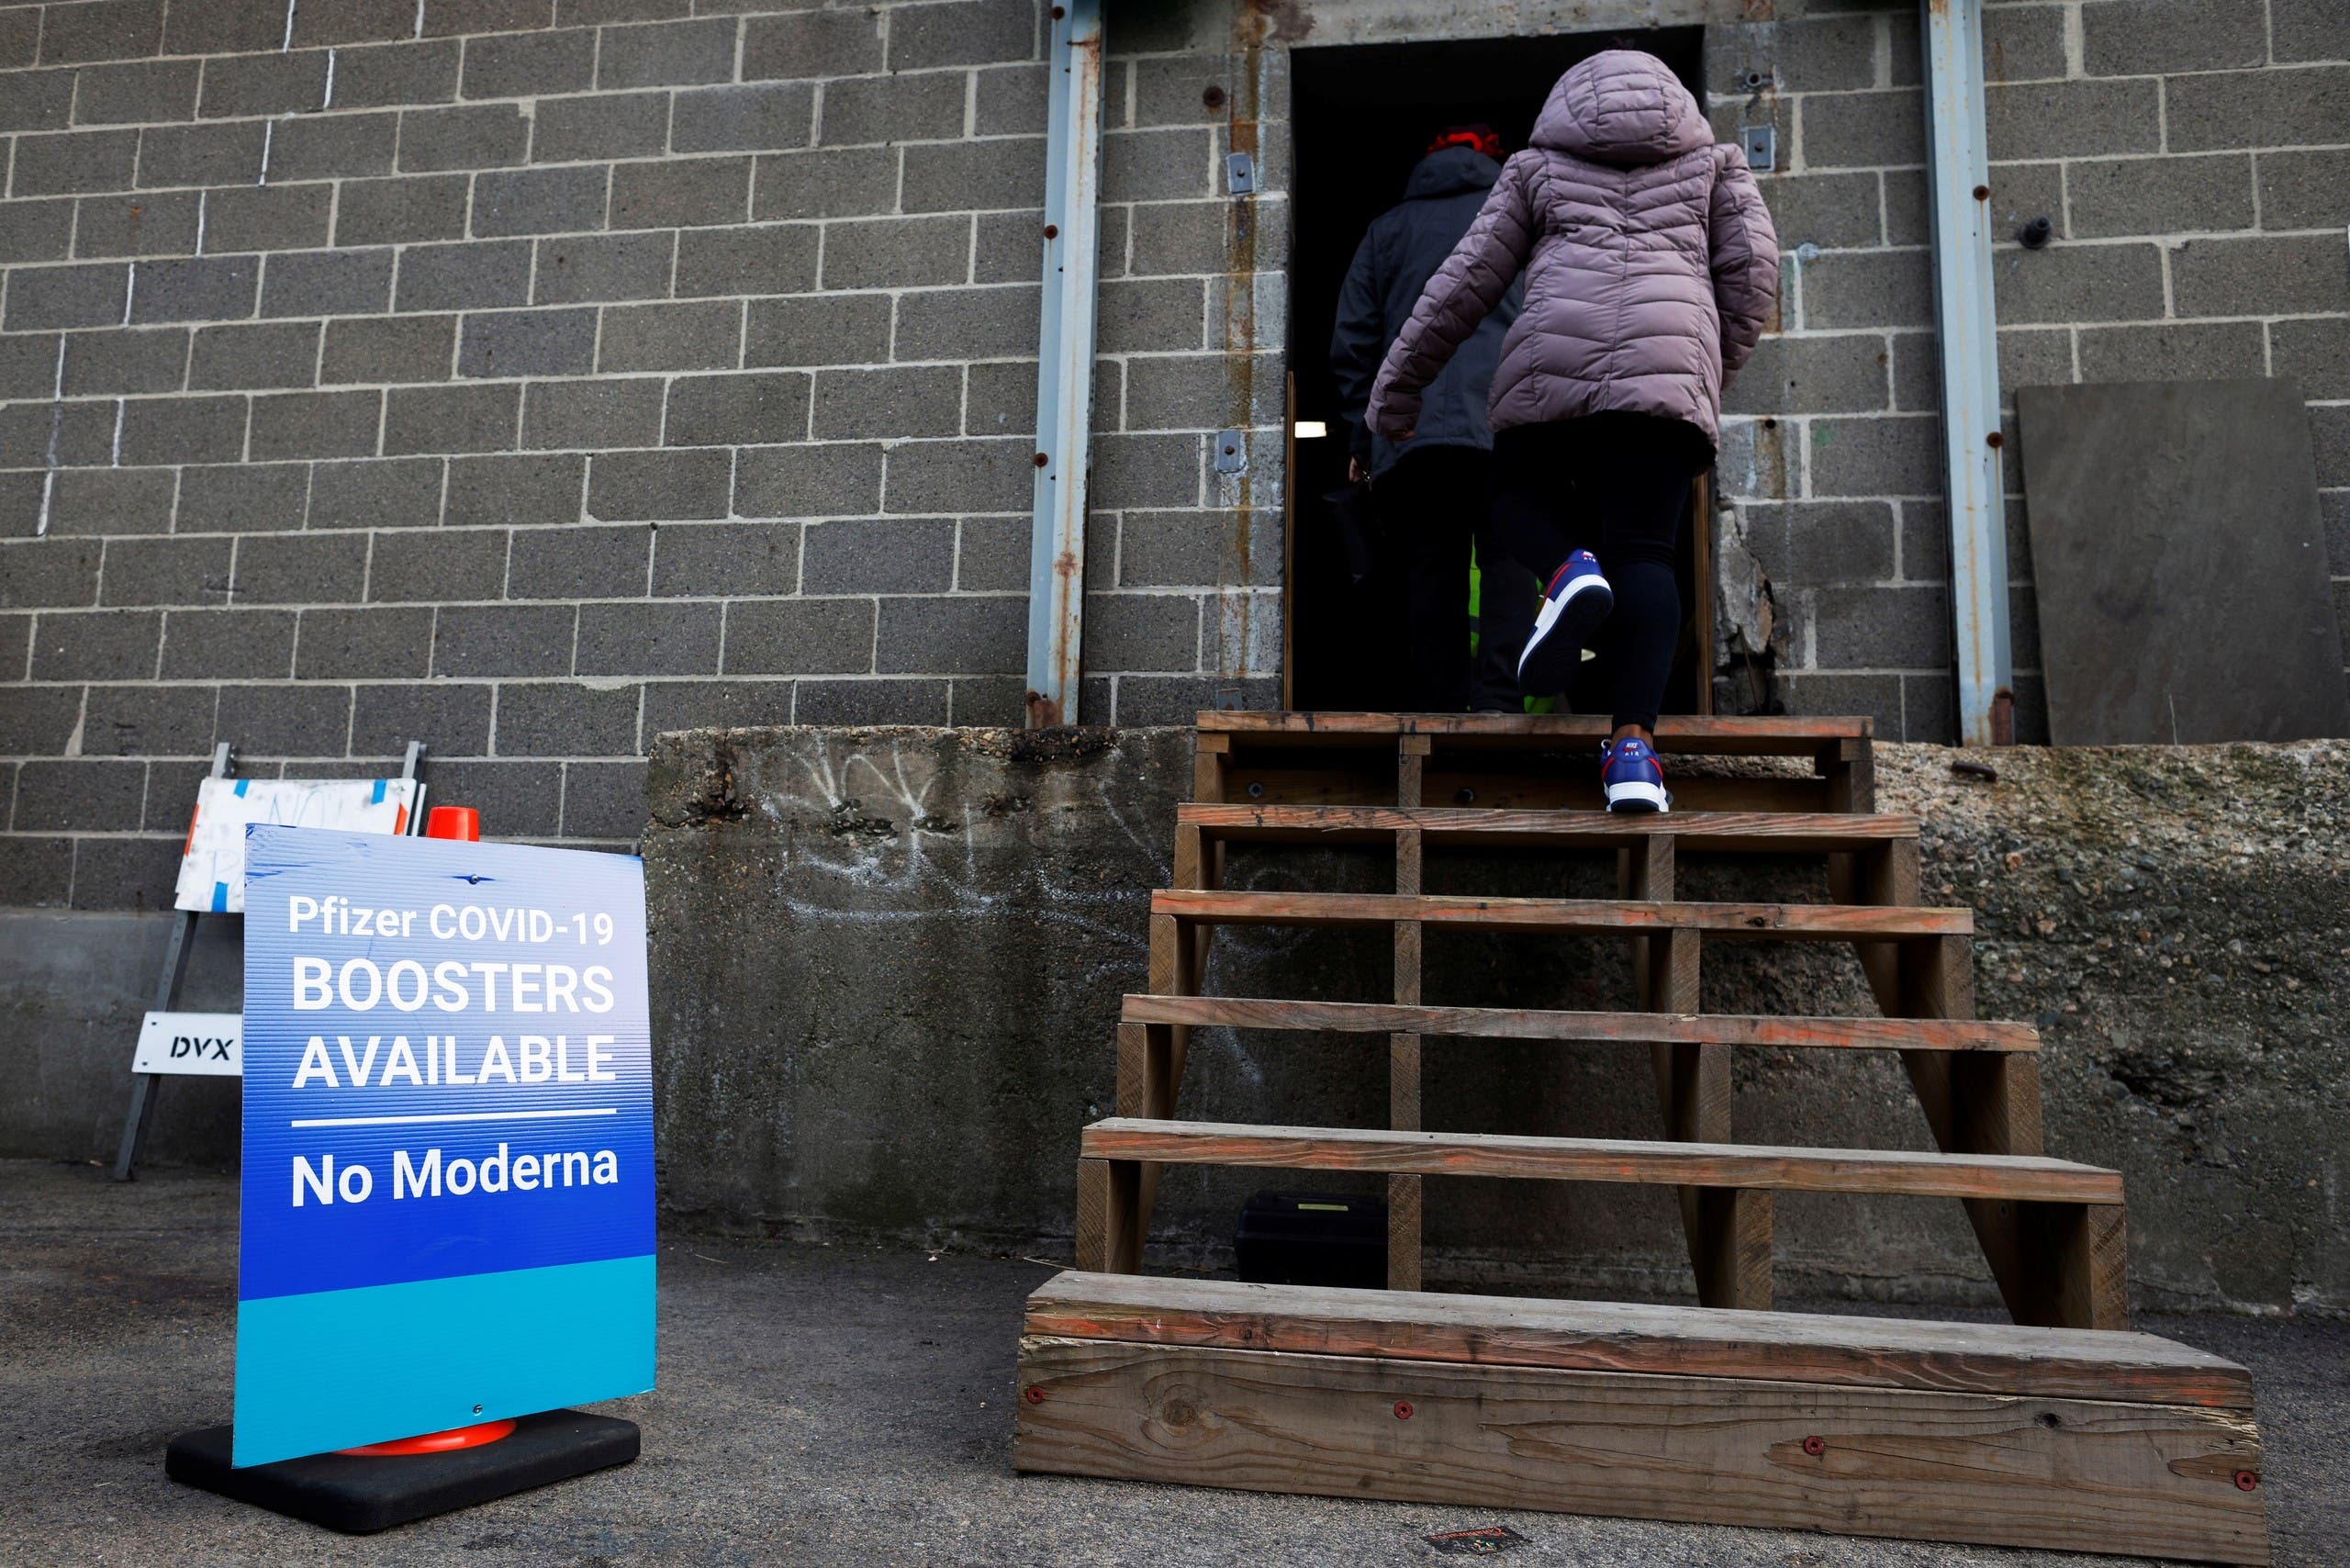 A sign in front of a vaccination center in Massachusetts in the United States reports that there are booster doses of the Pfizer vaccine